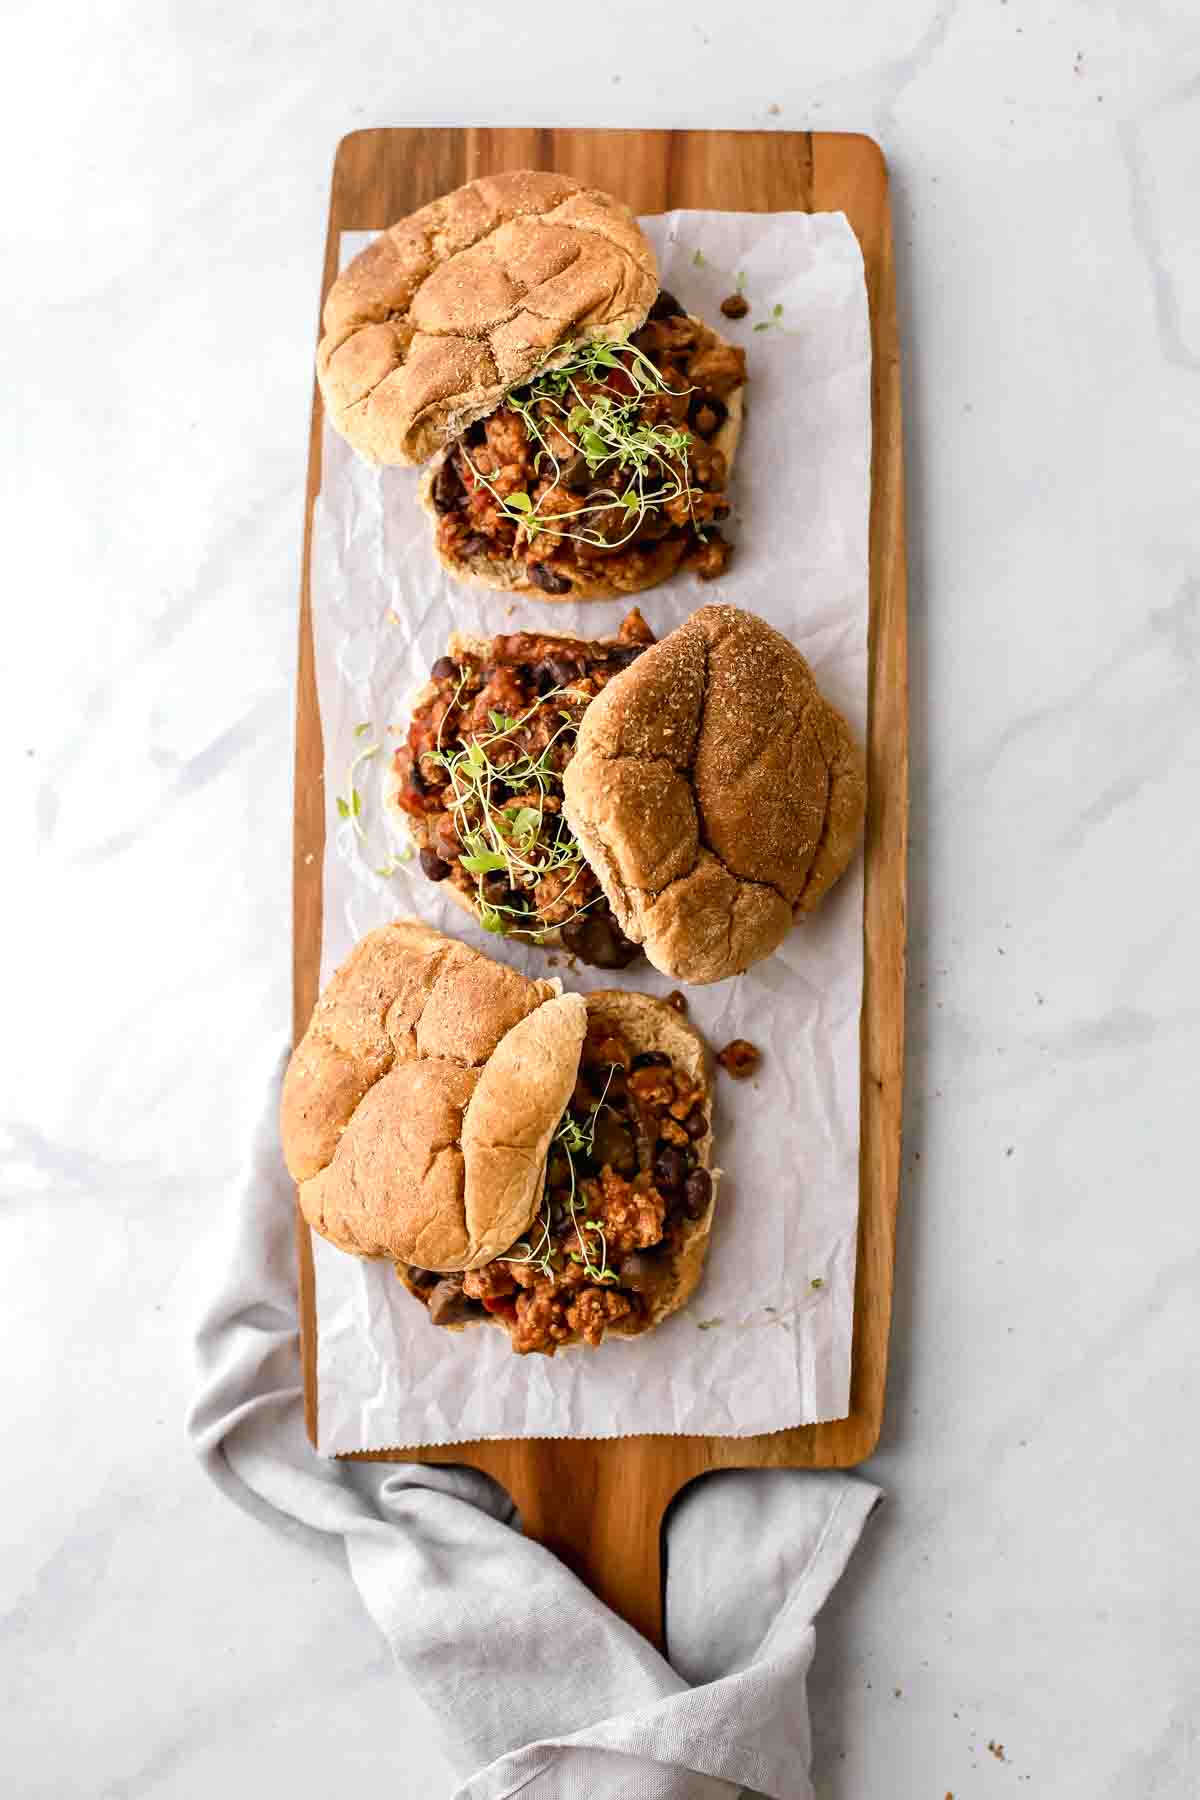 30-Minute Healthy Sloppy Joes Recipe served on a cutting board.